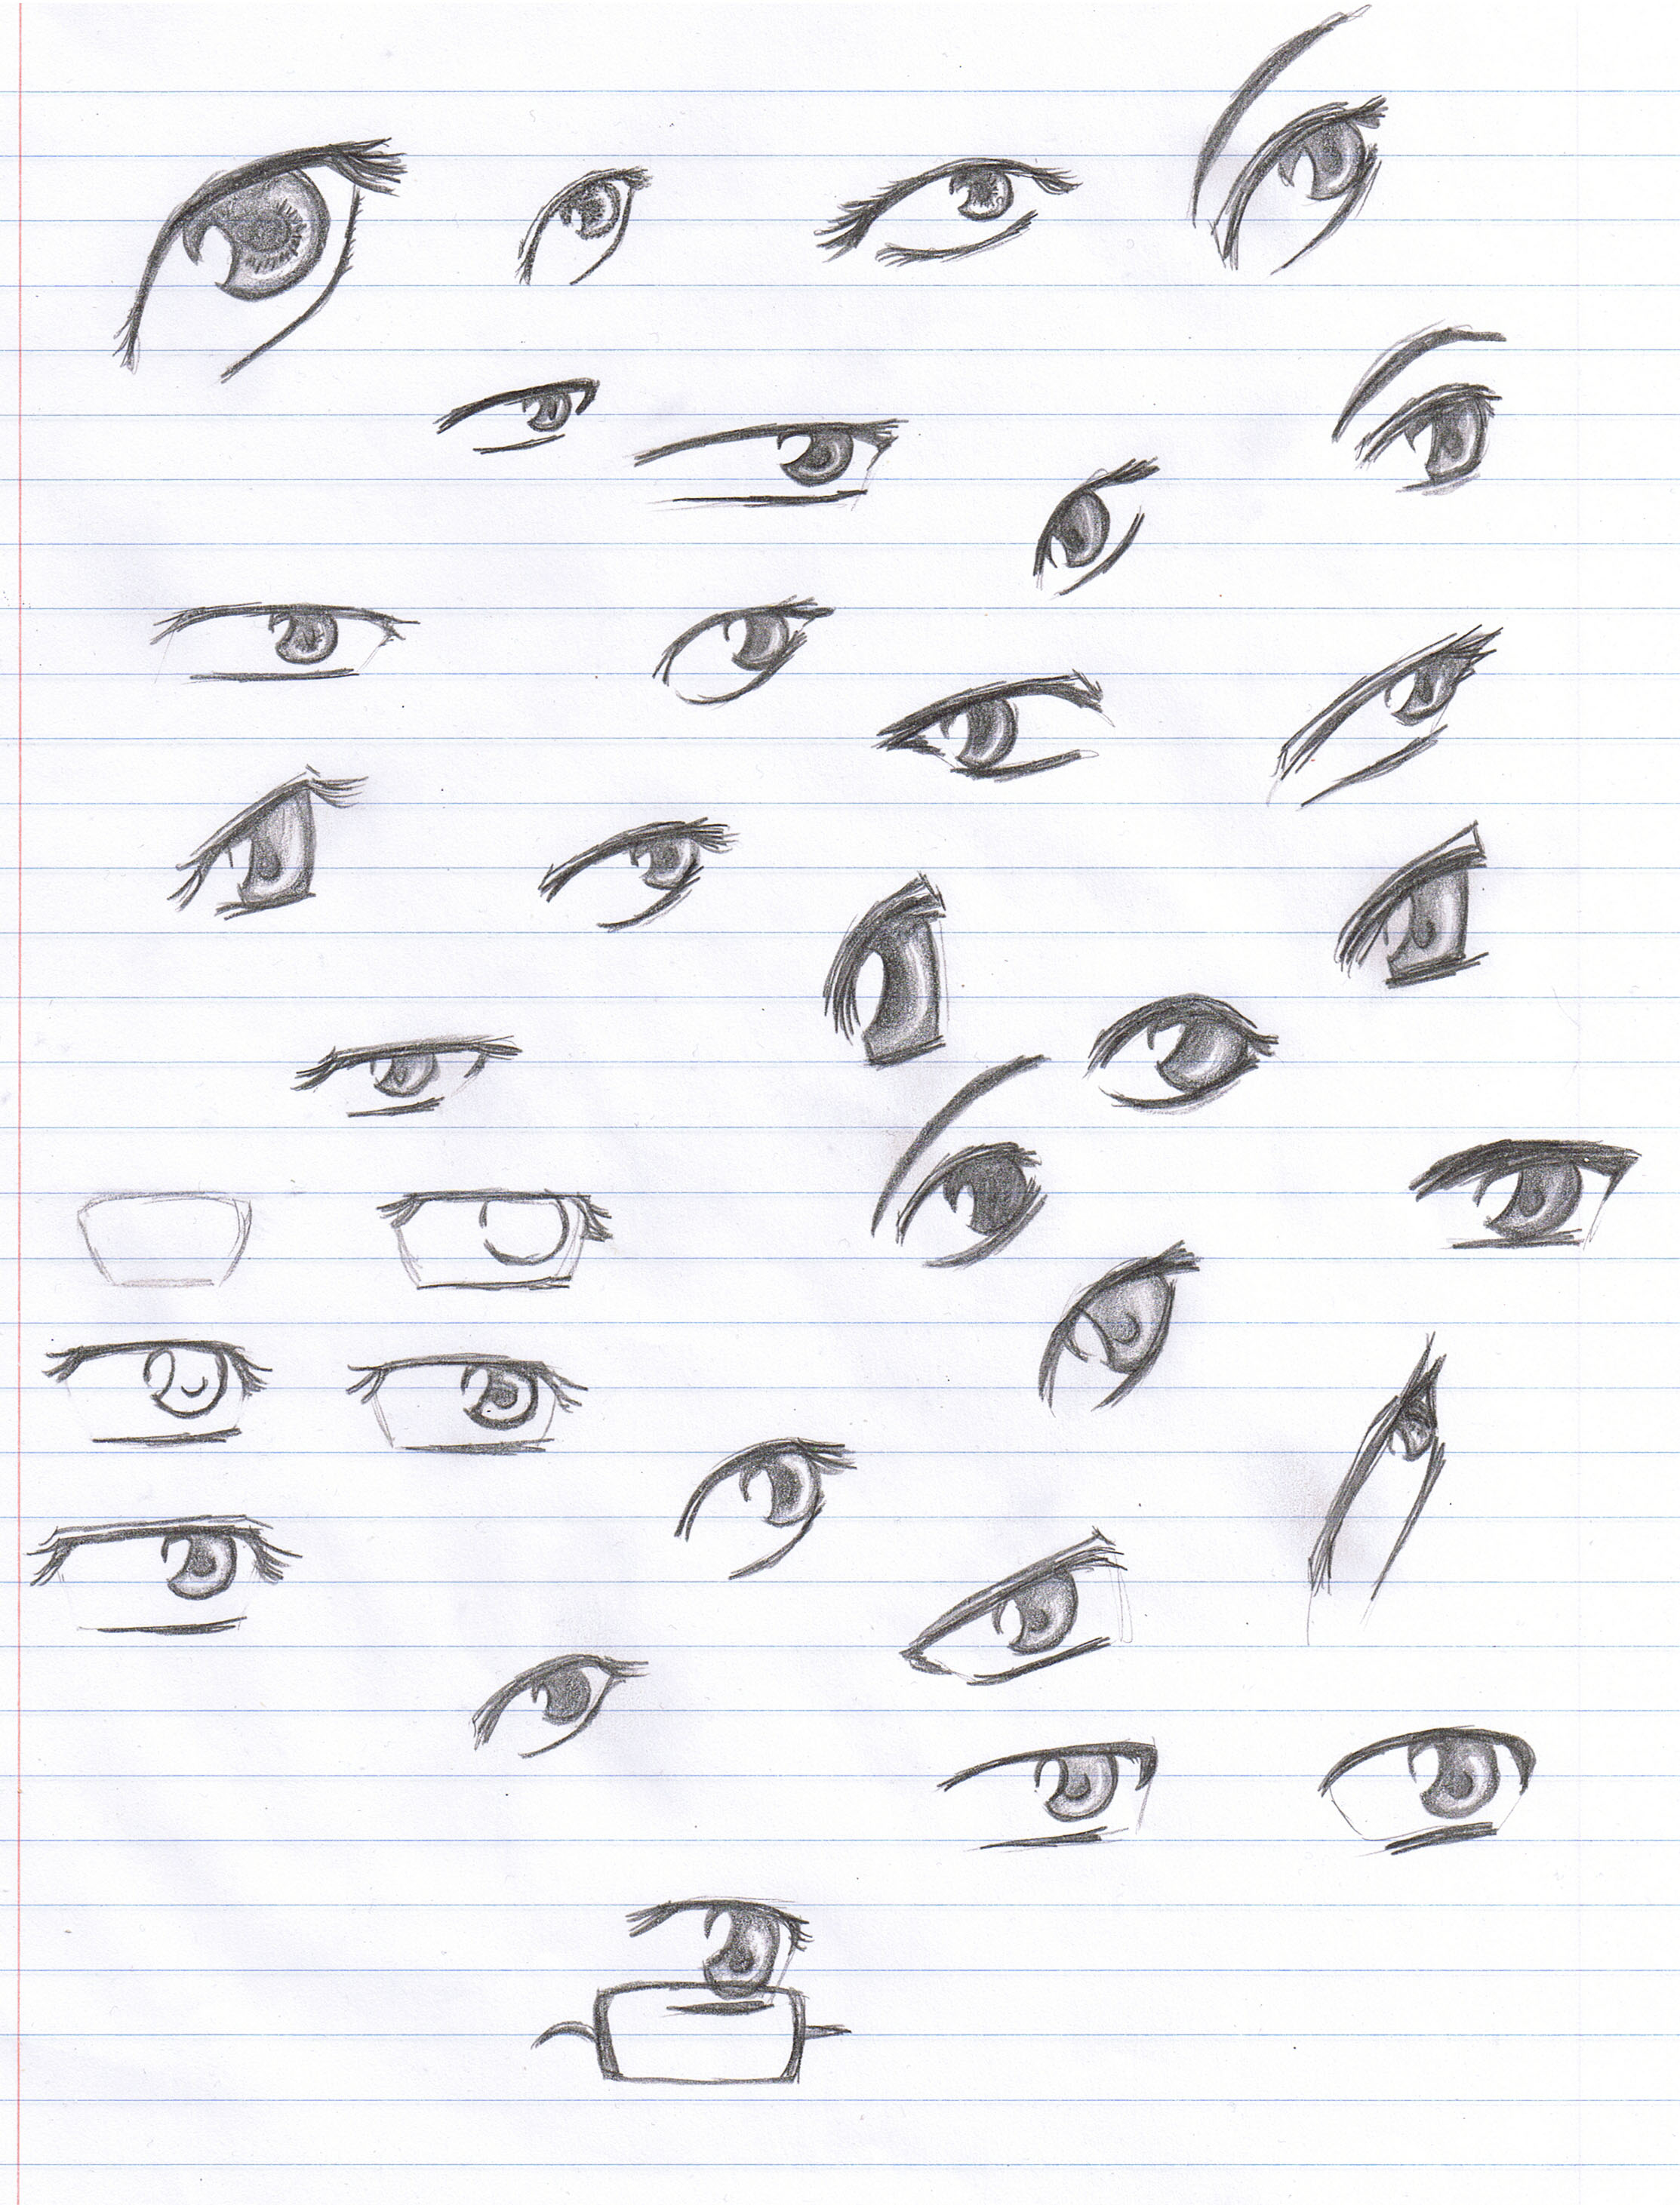 Anime Eyes Reference Anime Wallpapers Simple manga eye tutorial by mangaanimelover on deviantart. anime eyes reference anime wallpapers